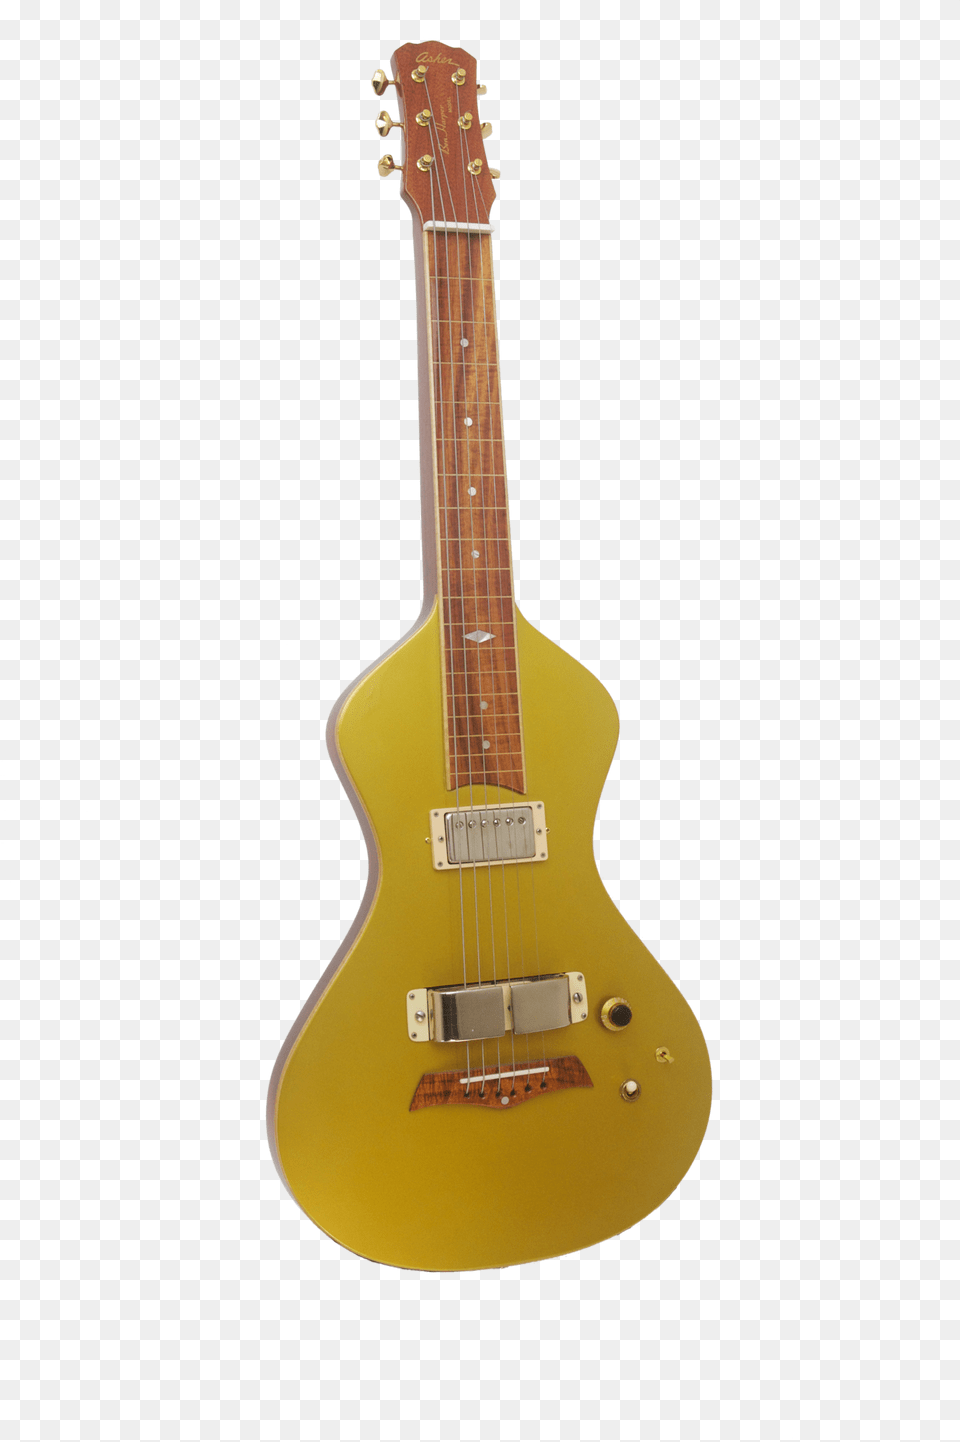 Sold Rare Ben Harper Owned And Played Signature Lap Electric Guitar, Musical Instrument, Bass Guitar, Electric Guitar Free Transparent Png